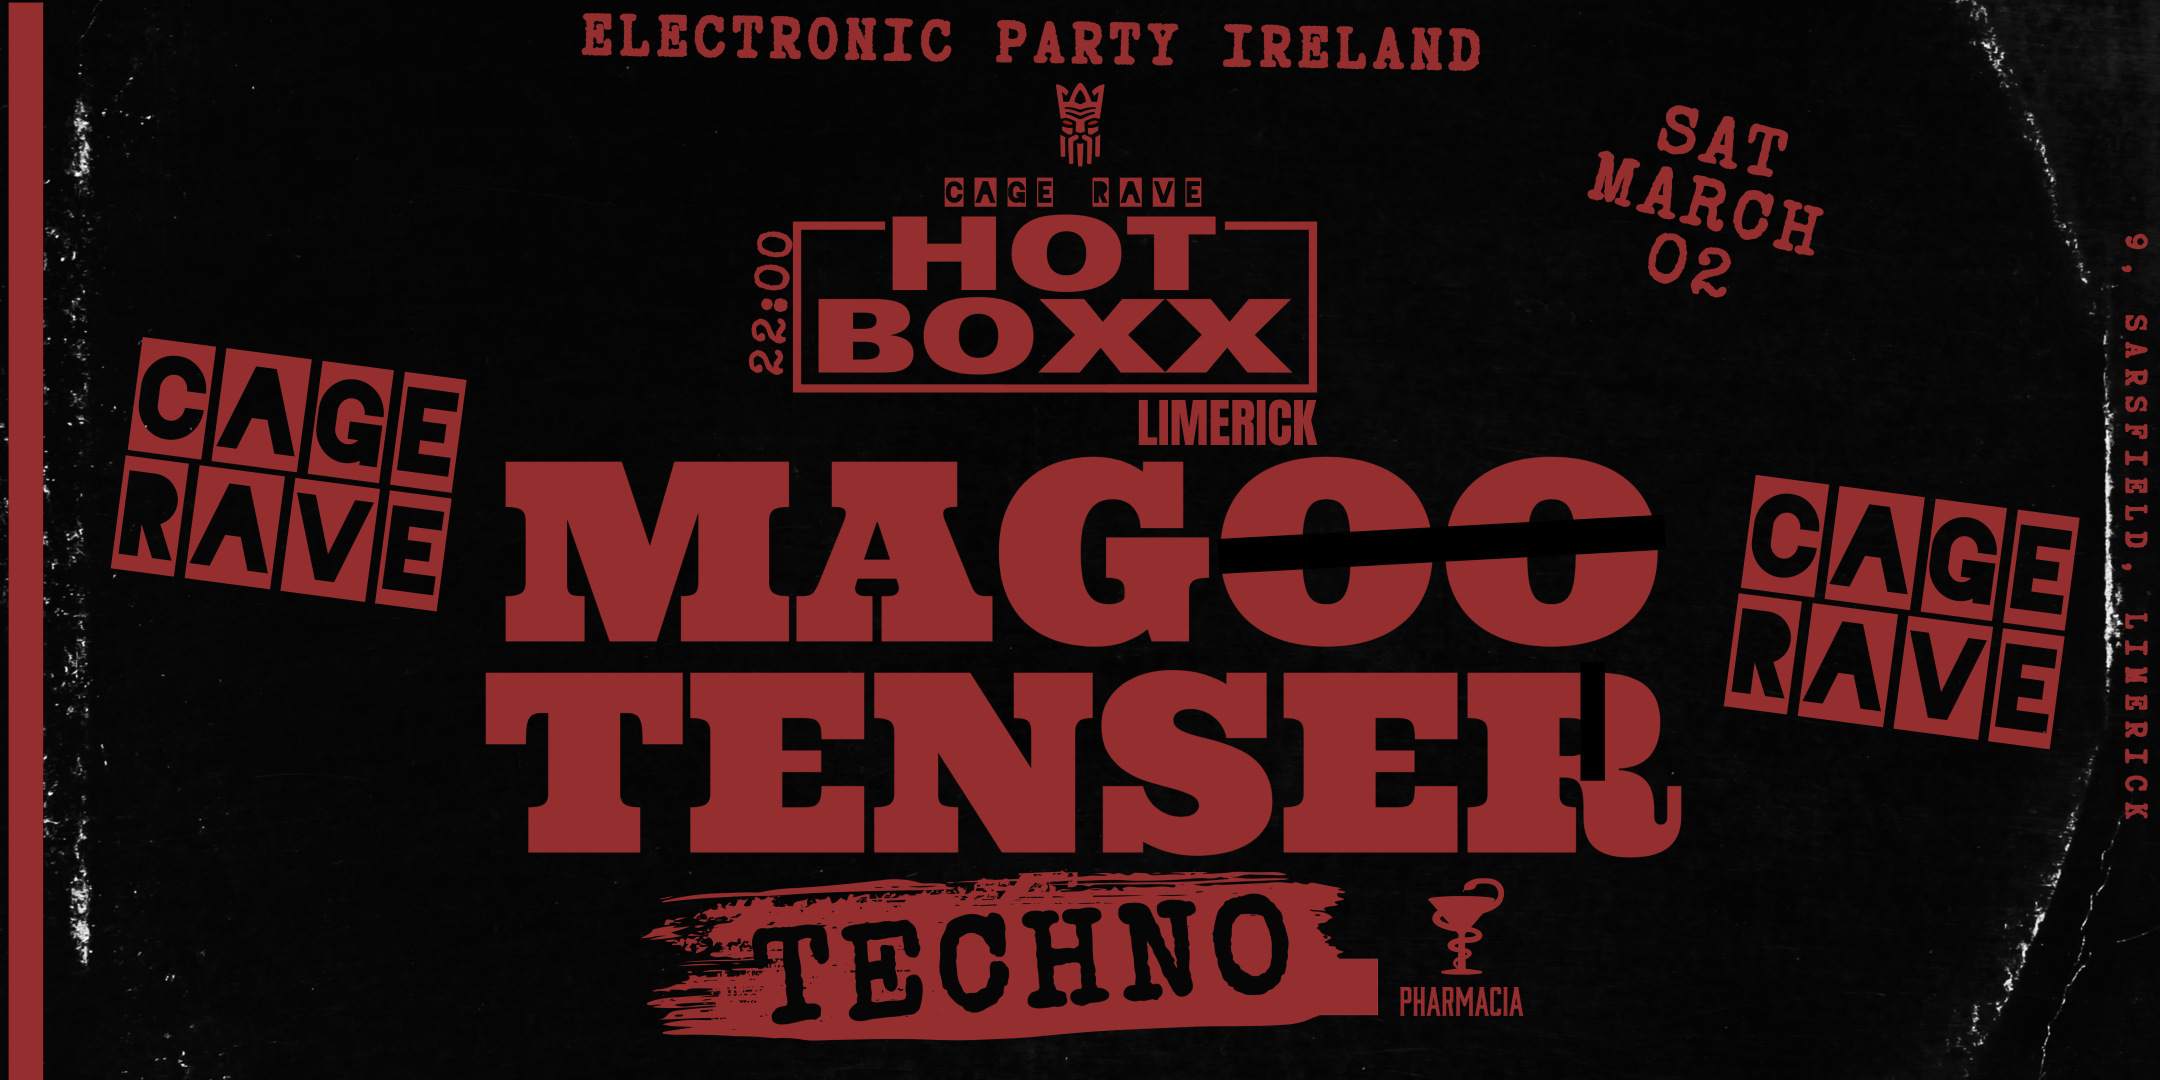 HOTBOXX TECHNO Cage Rave Limerick - フライヤー表